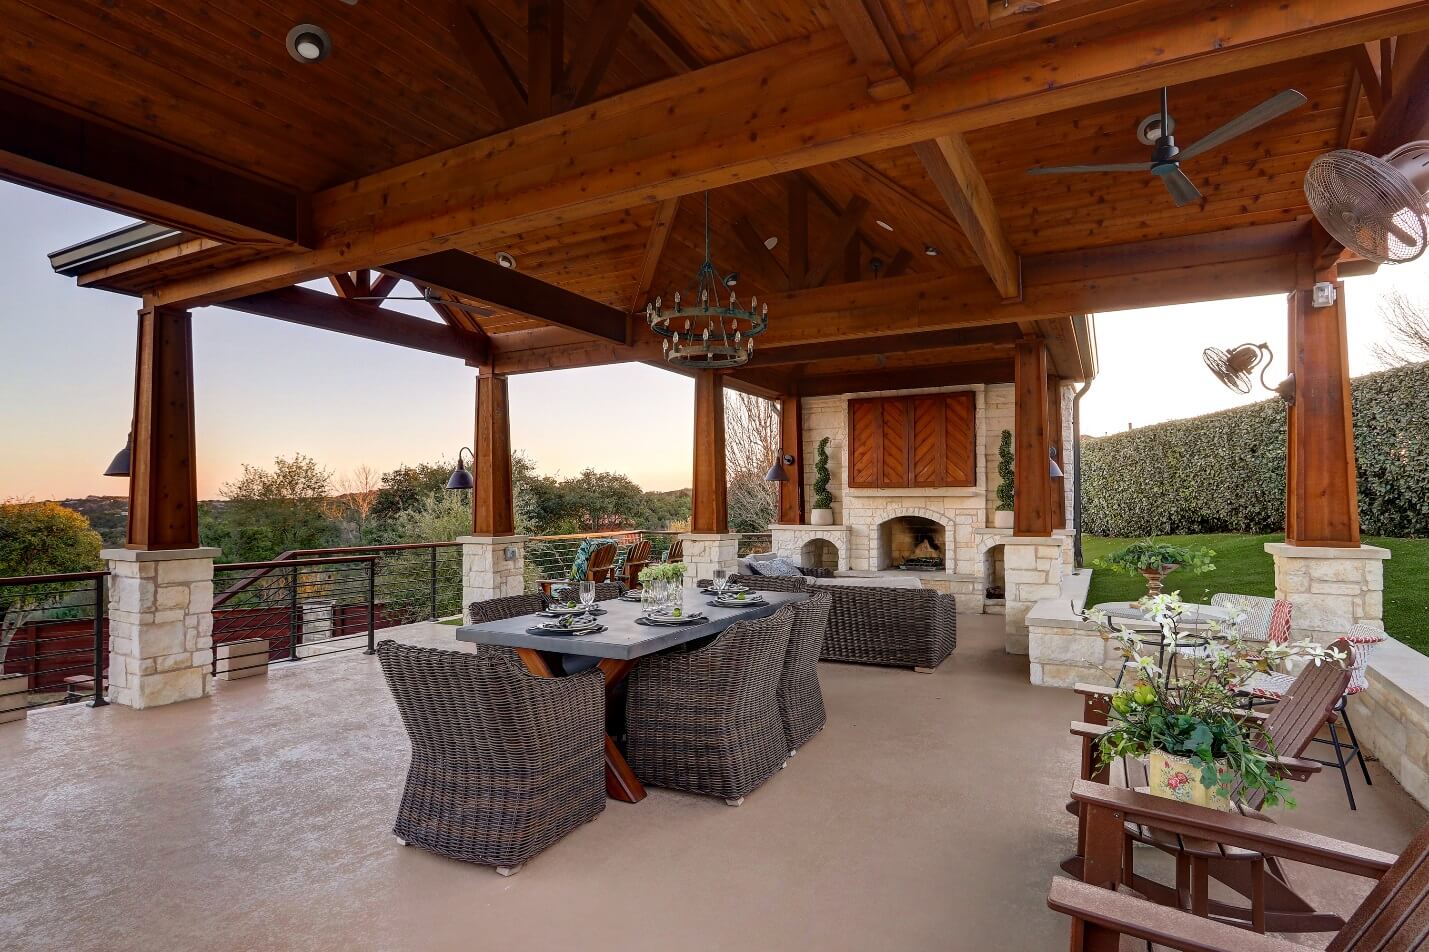 Dining area on outdoor living space